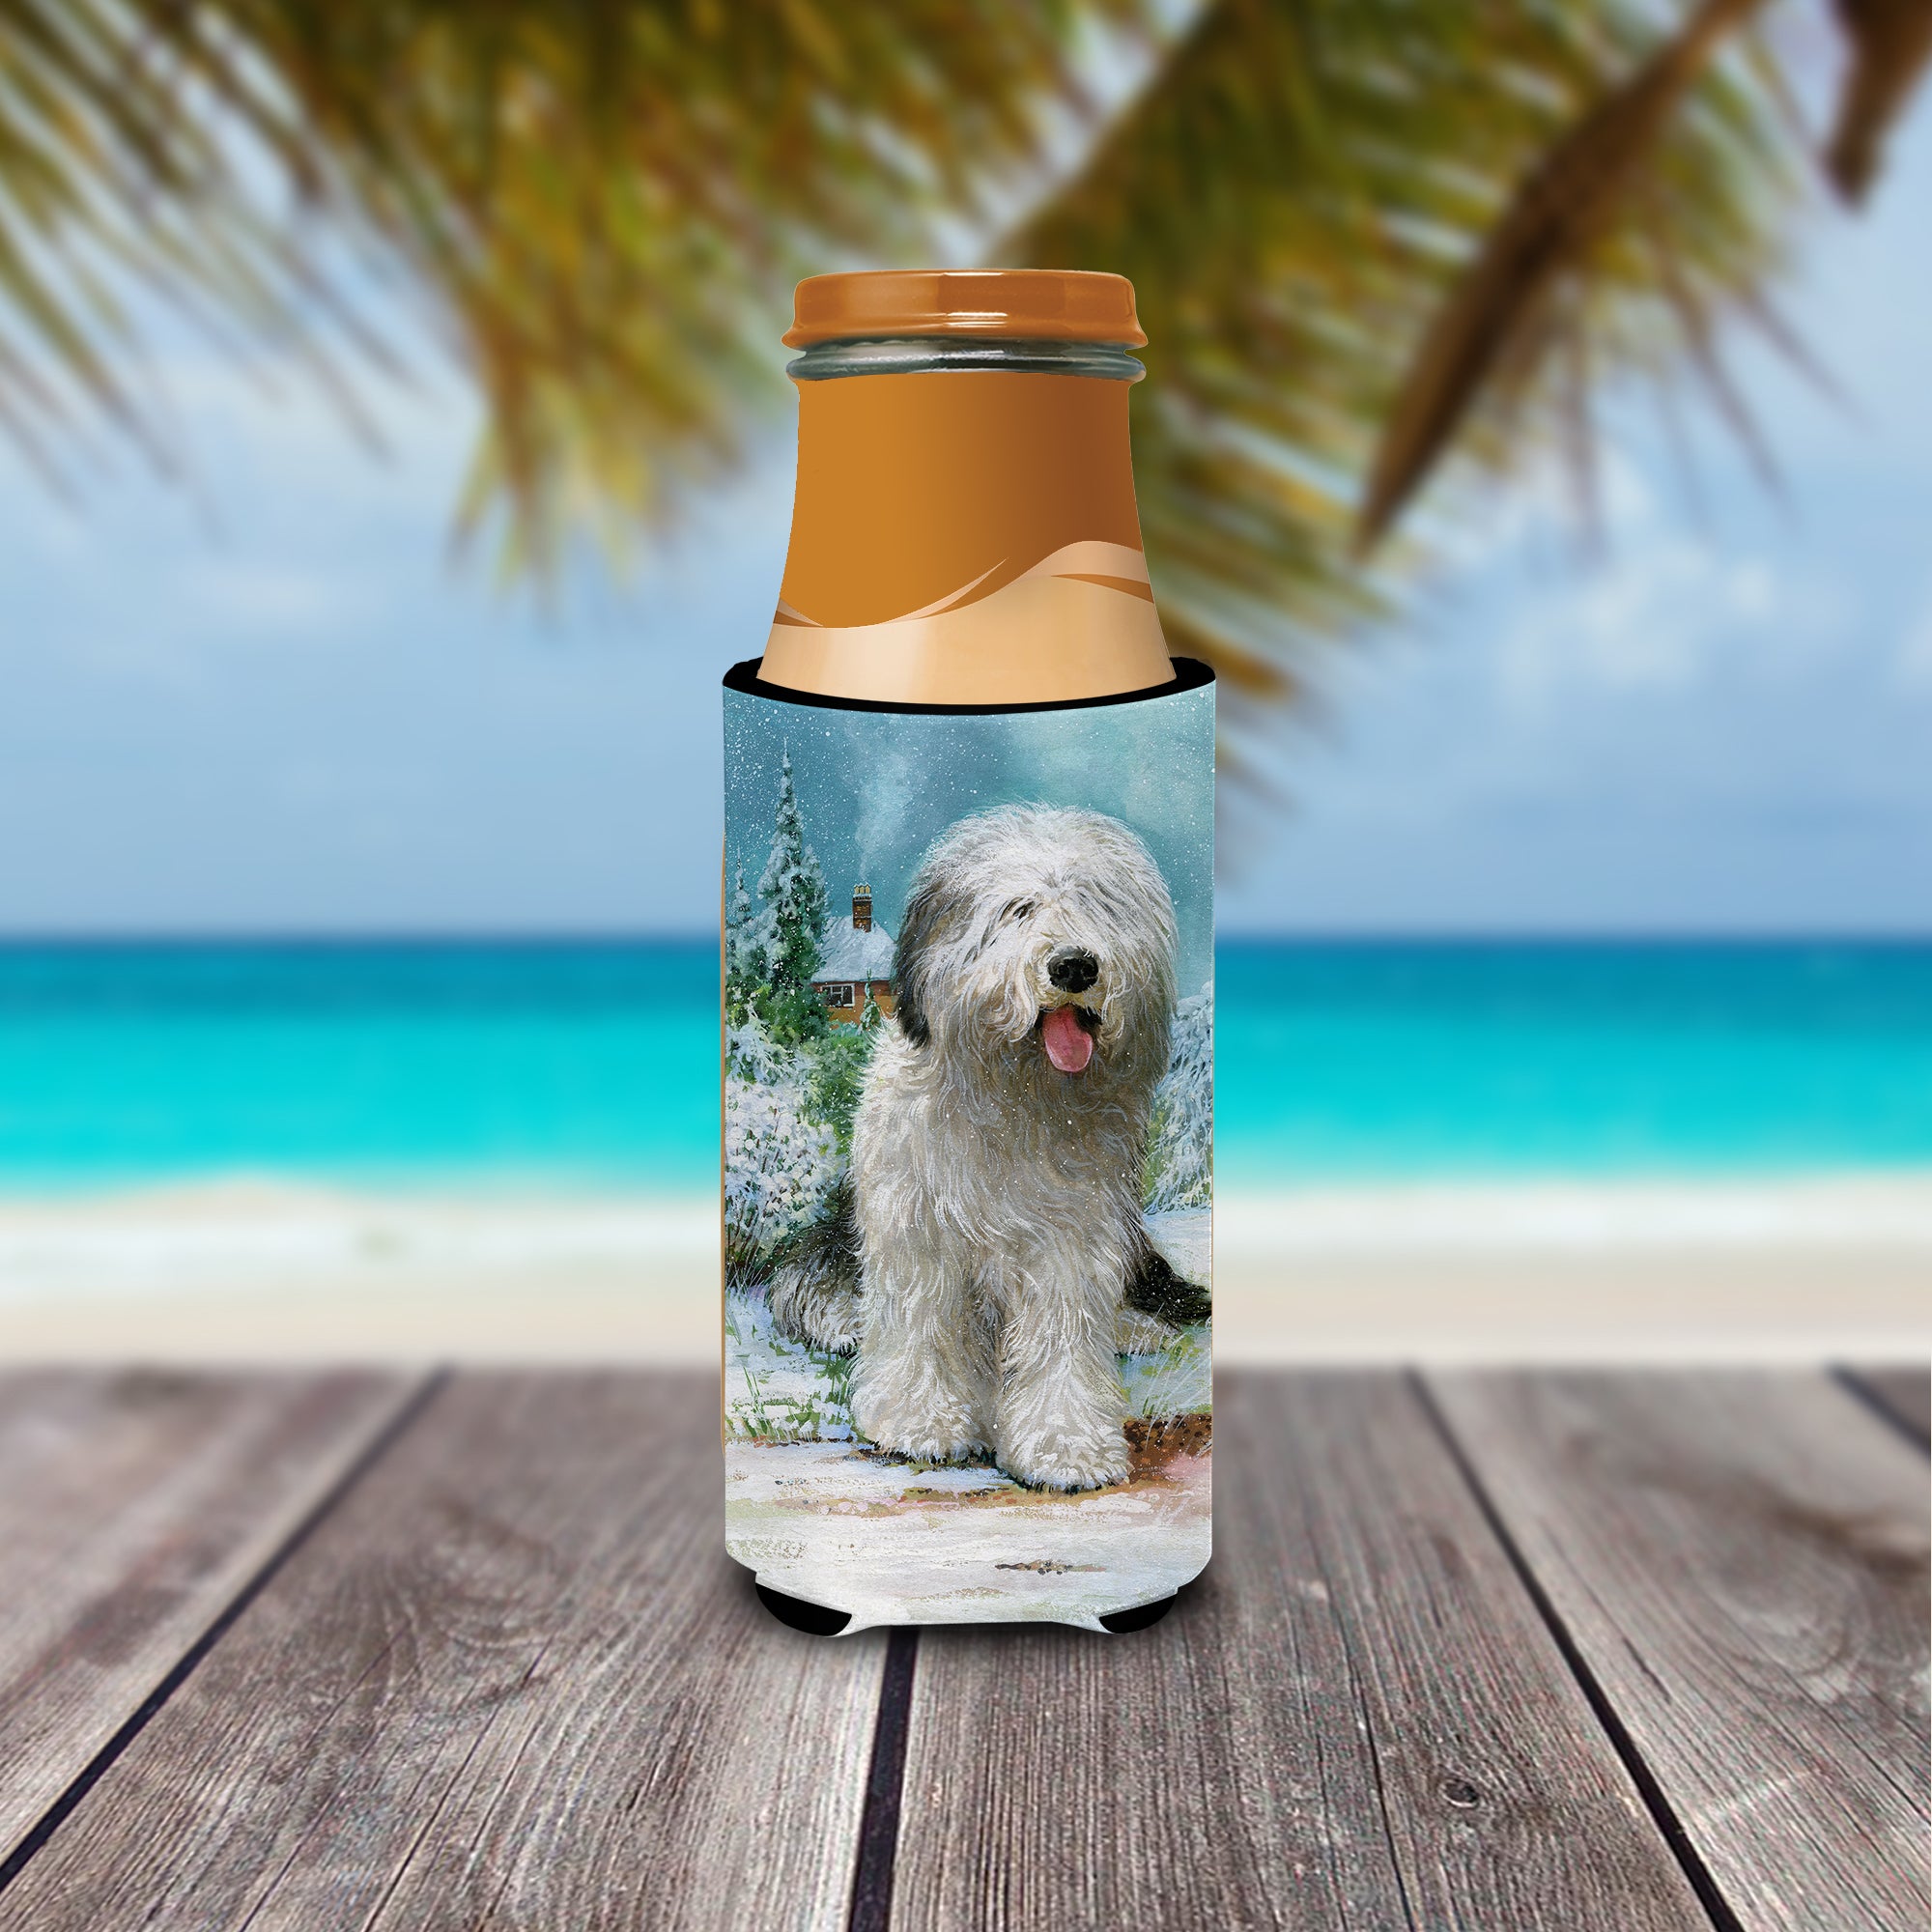 Old English Sheepdog by Don Squires Ultra Beverage Insulators for slim cans SDSQ0304MUK